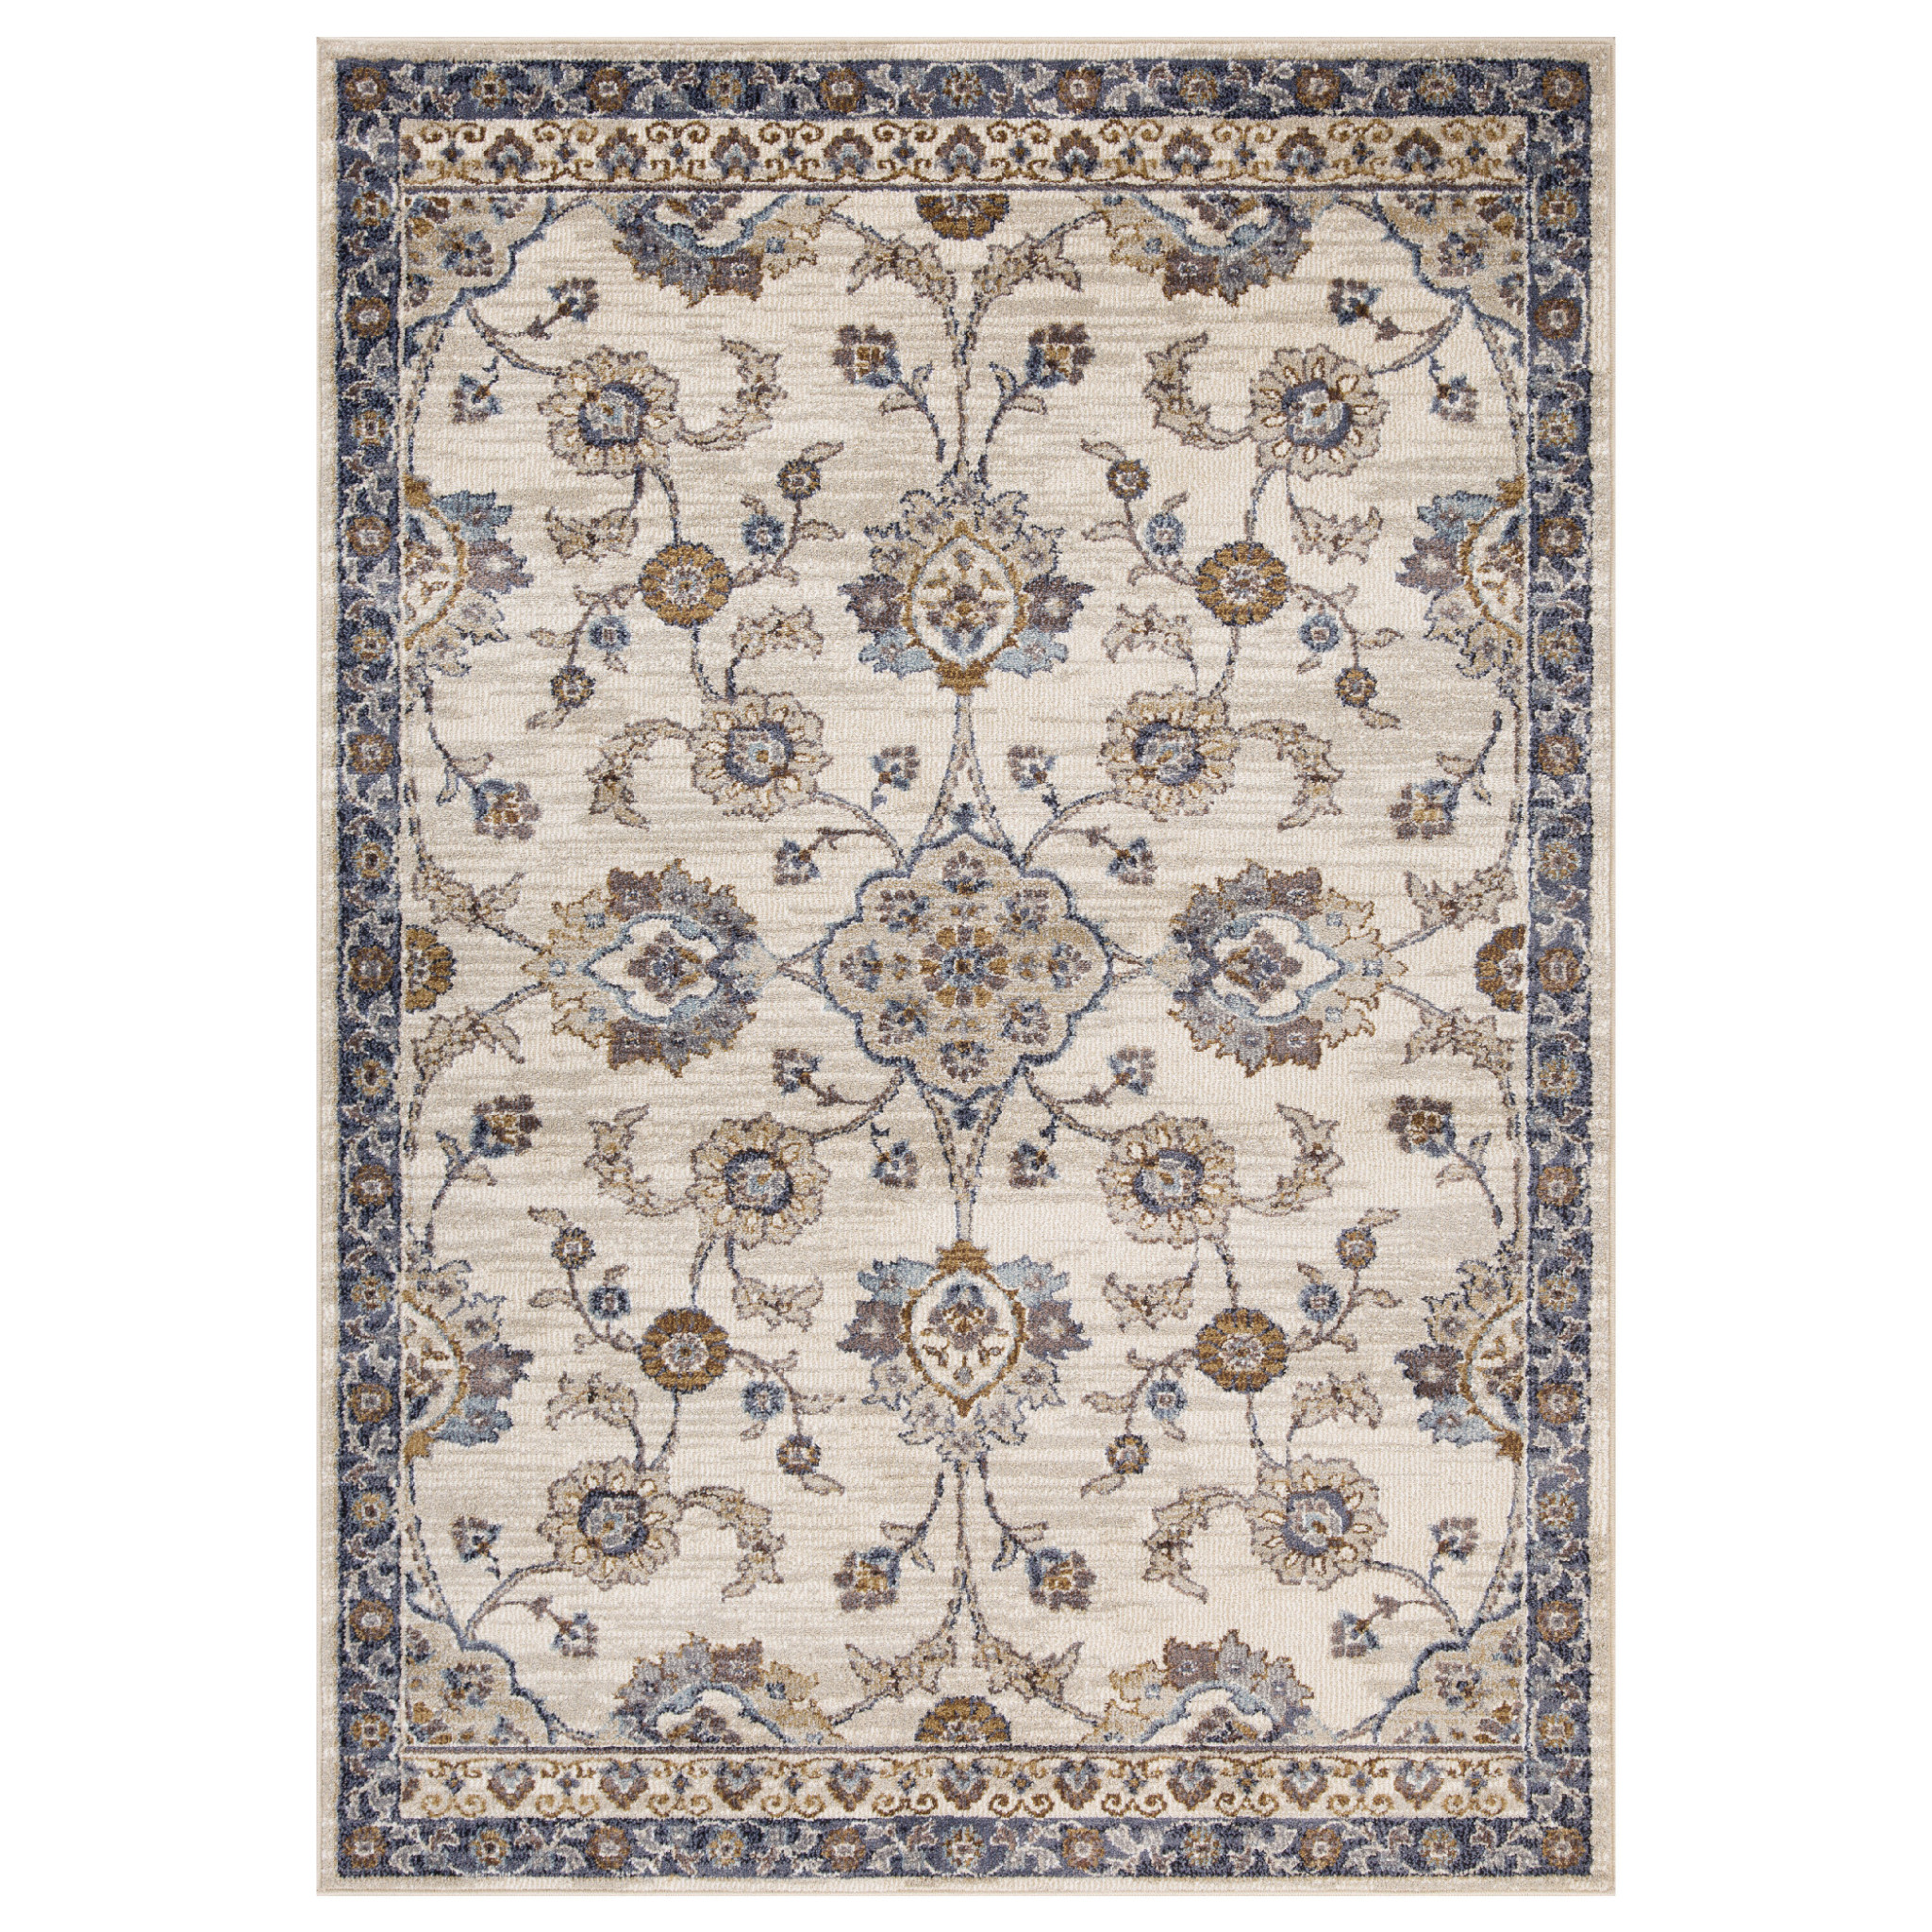 5' x 7' Gray and Ivory Floral Power Loom Area Rug-532173-1